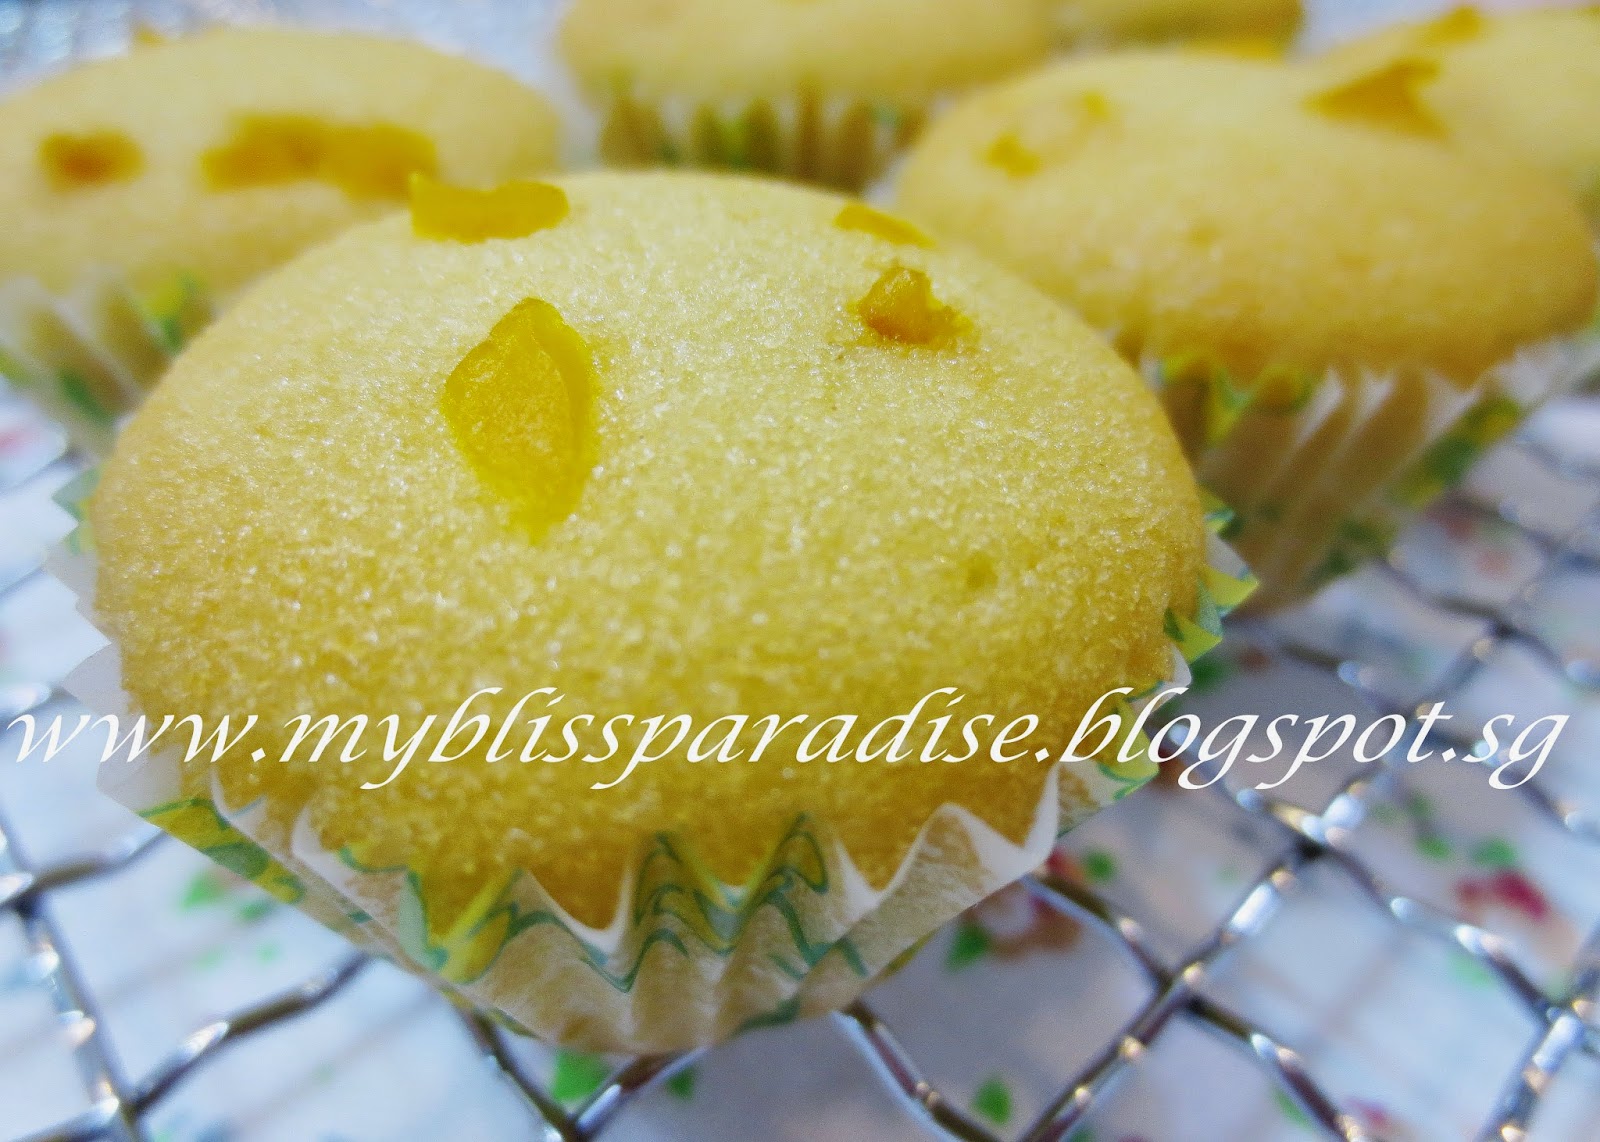 http://myblissparadise.blogspot.sg/2014/06/preserved-candied-ginger-mini-muffins.html